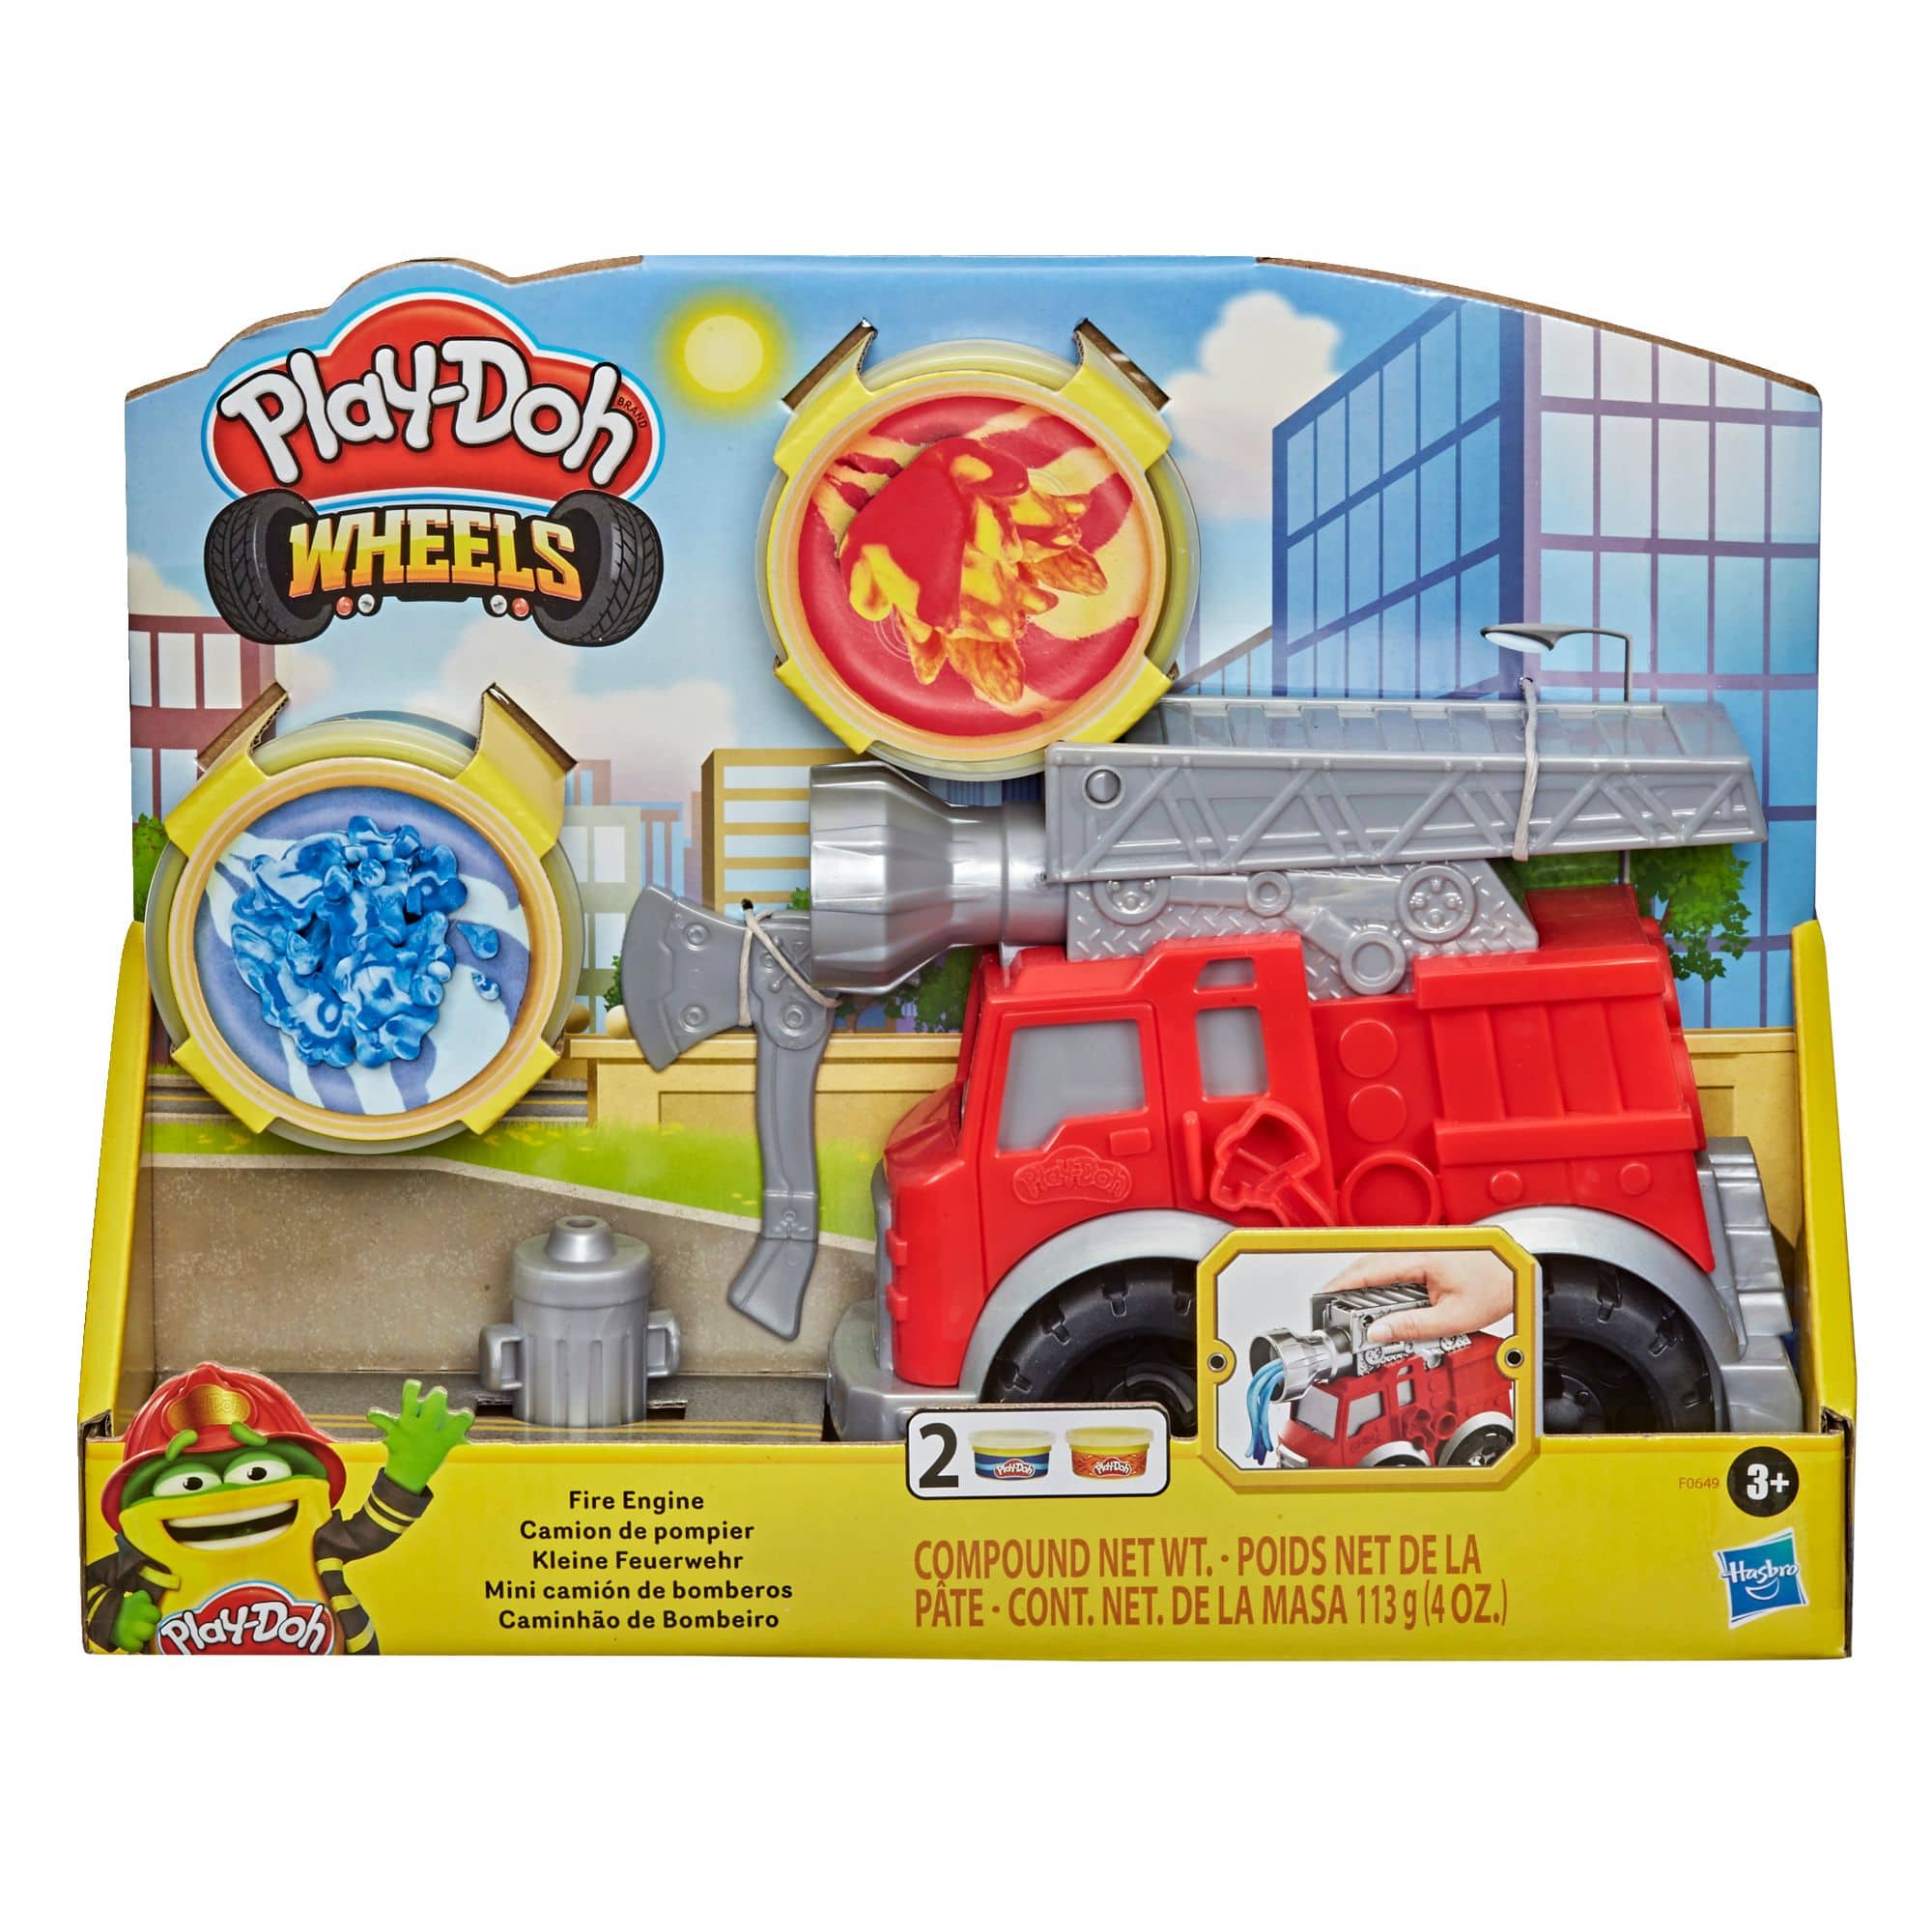 Play Doh Wheels Fire Truck, Ages 3+